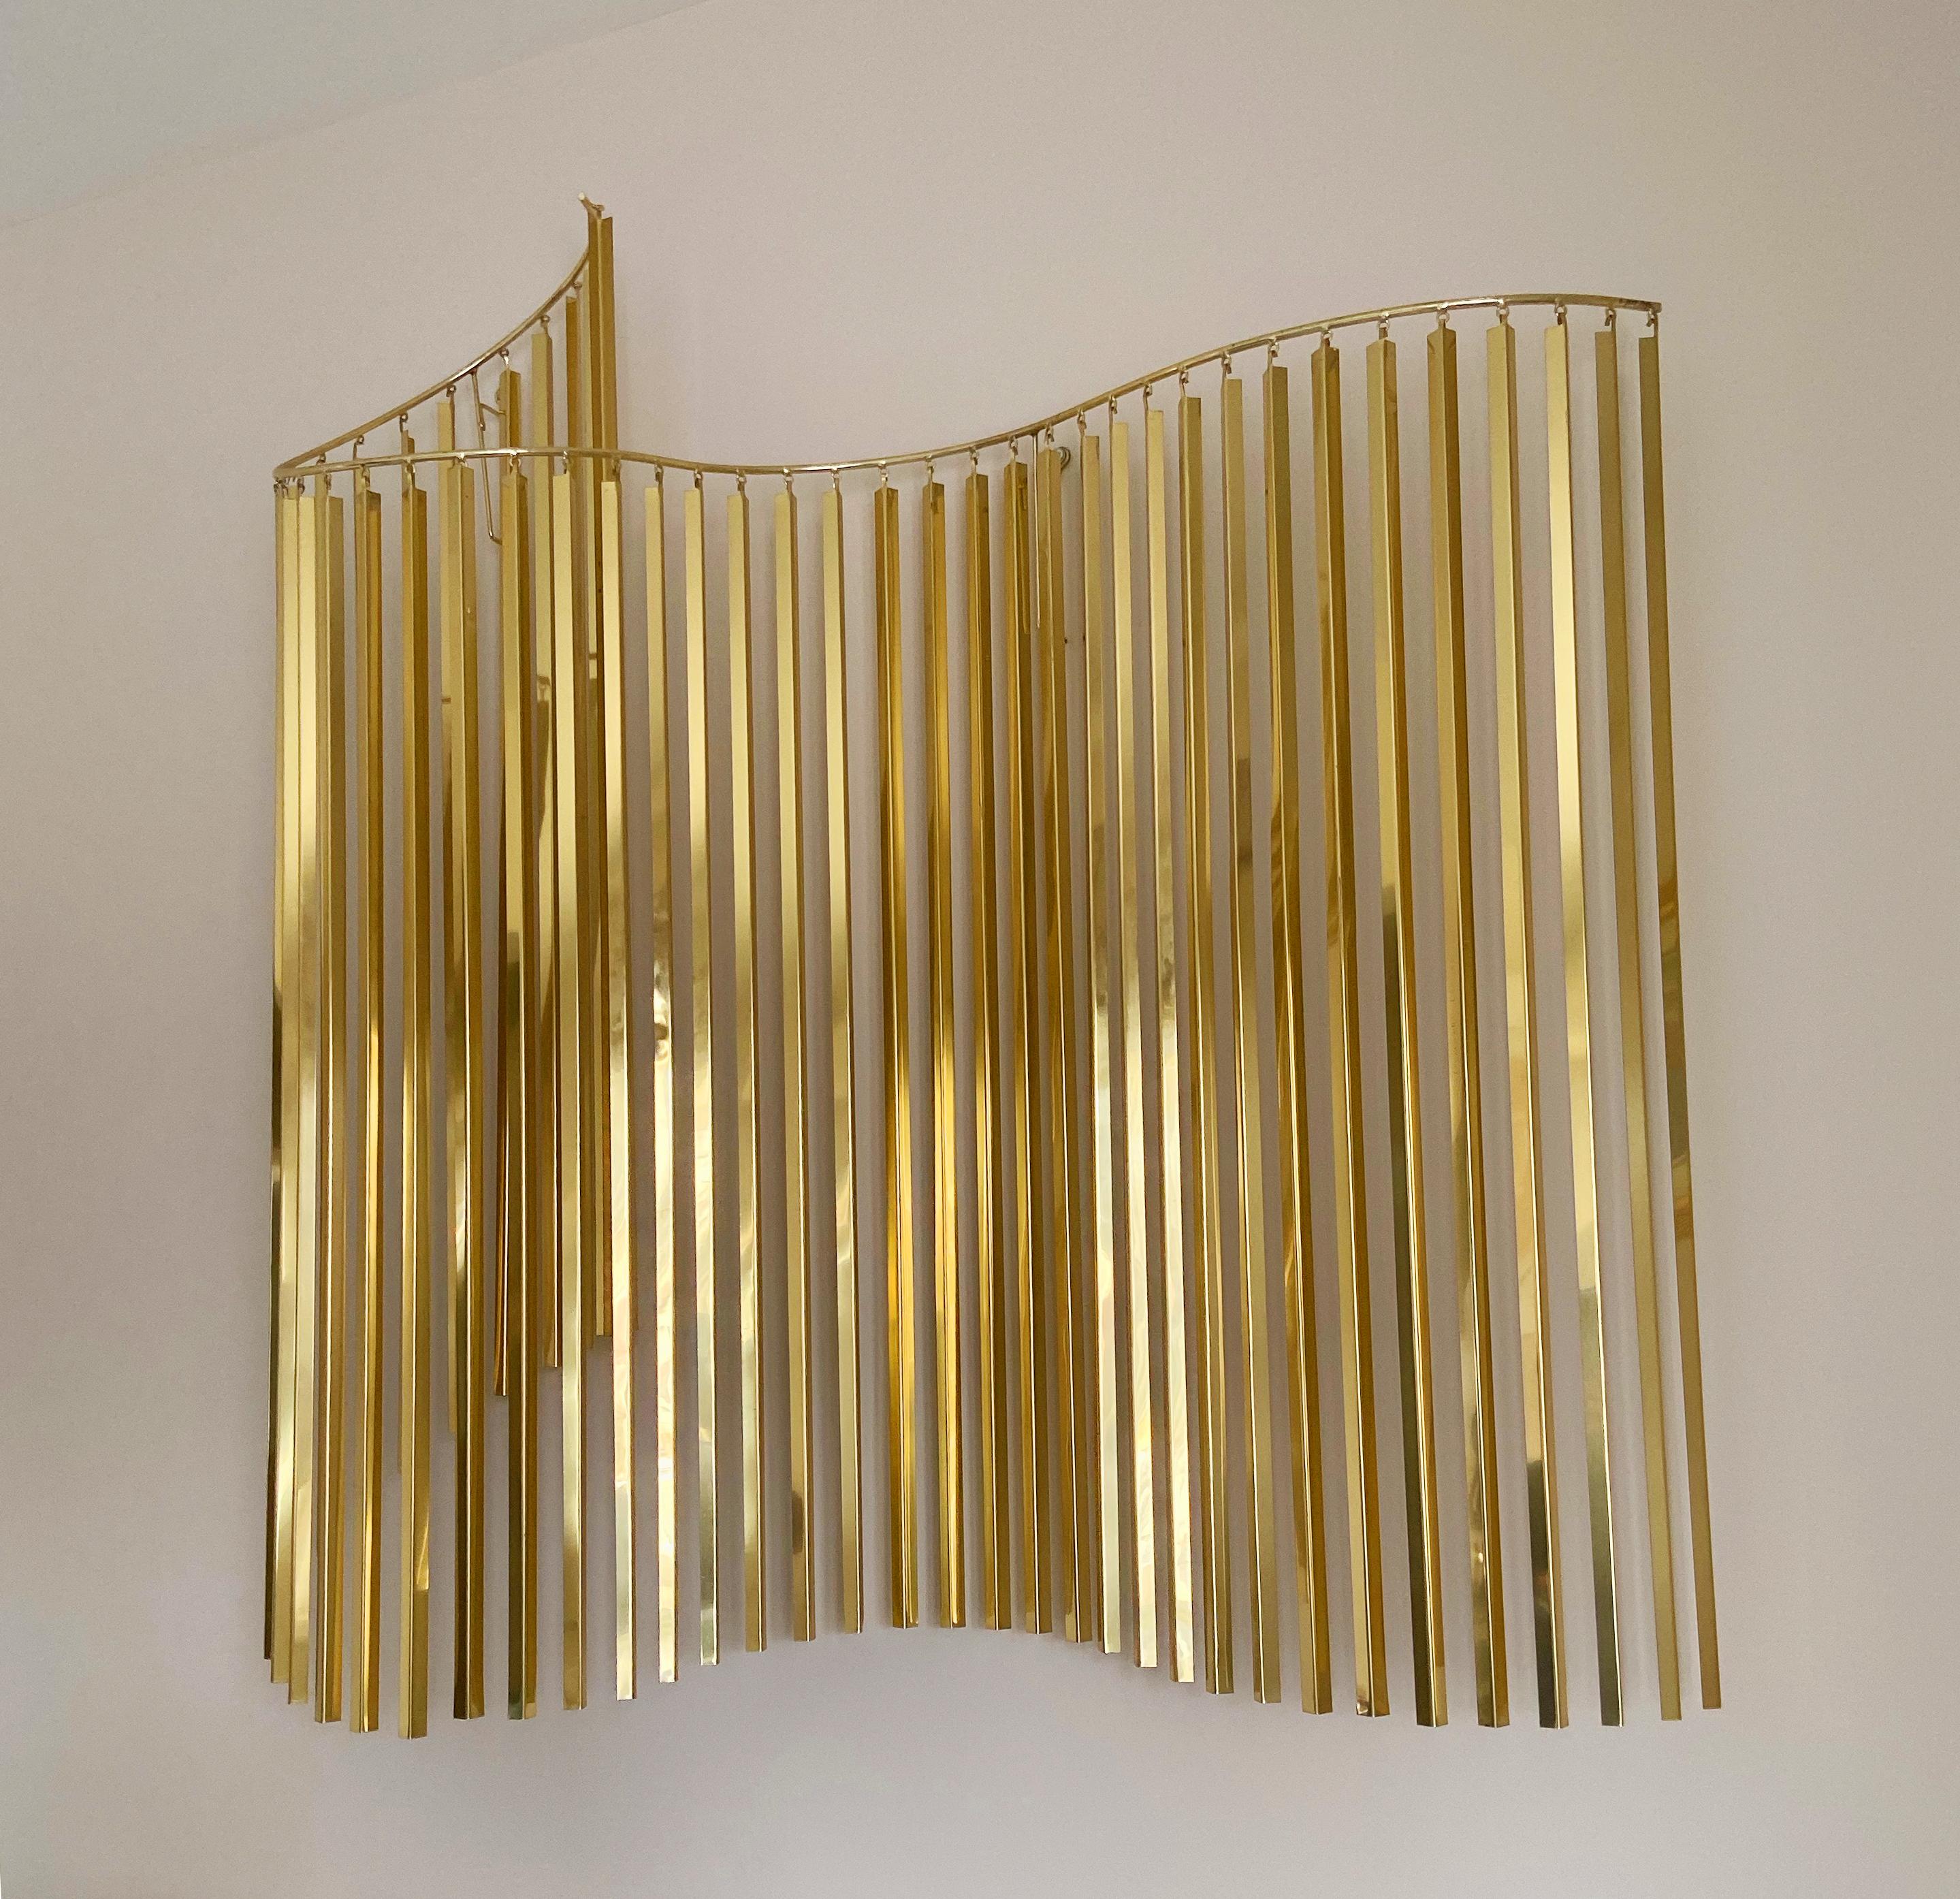 Late 20th Century Hollywood Regency Glam Brass / Gold Wall Hanging Sculpture by Curtis Jere